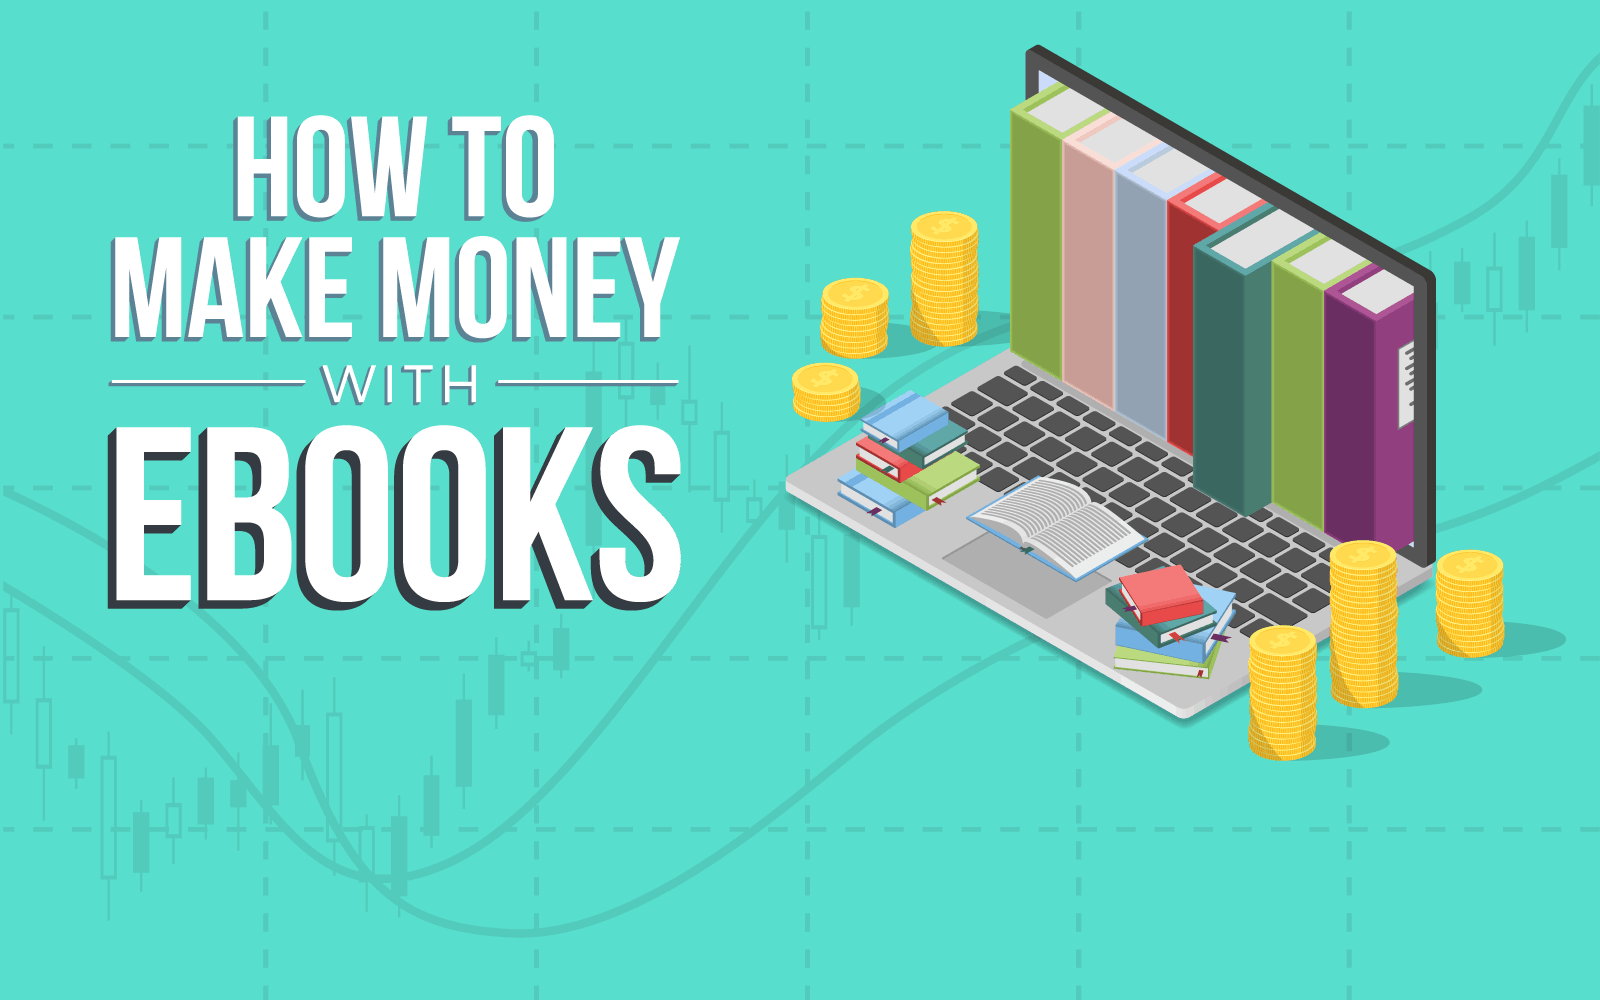 Make money online : Publish and sell e-books or audiobooks